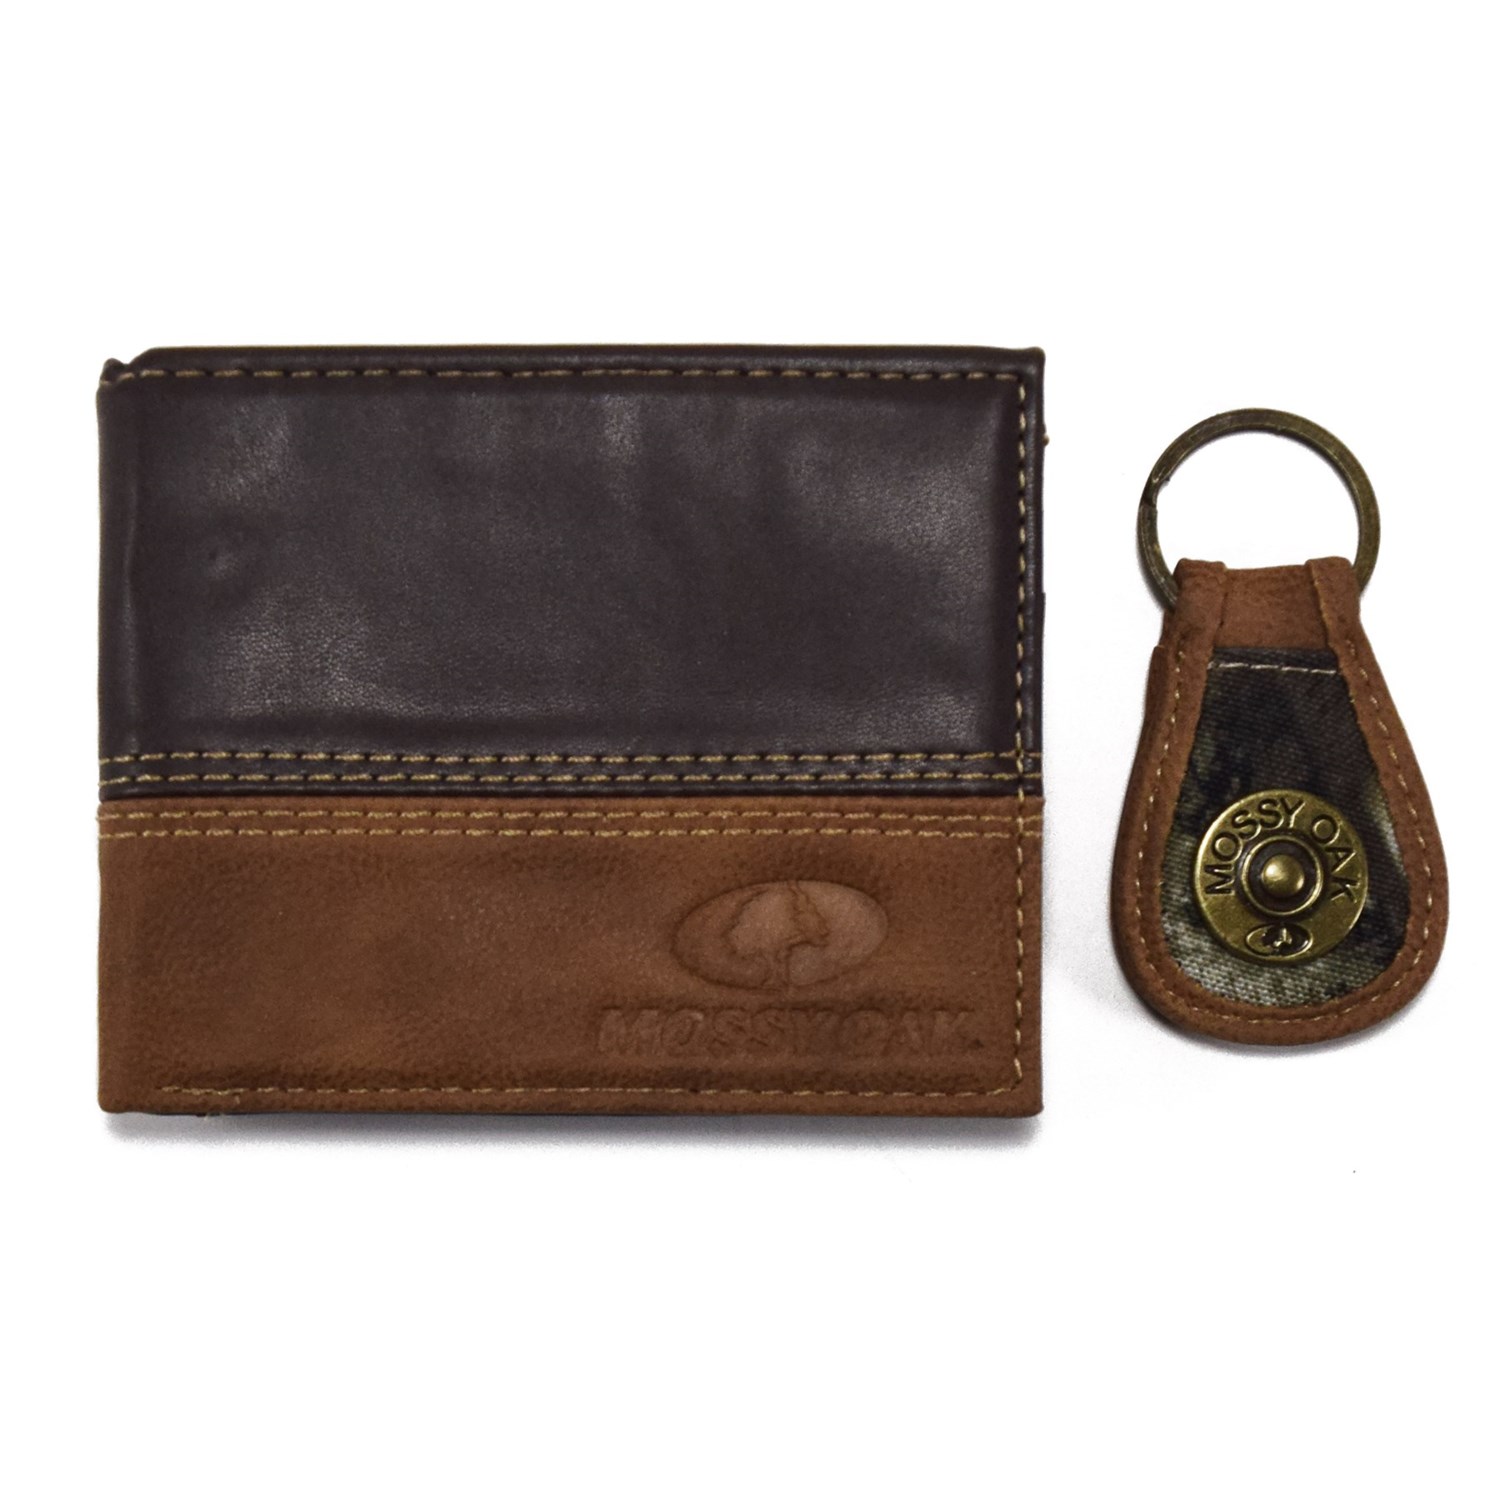 Mossy Oak Embossed Bi-Fold Two-Tone Leather Wallet and Engraved Key Chain (For Men) - Save 76%